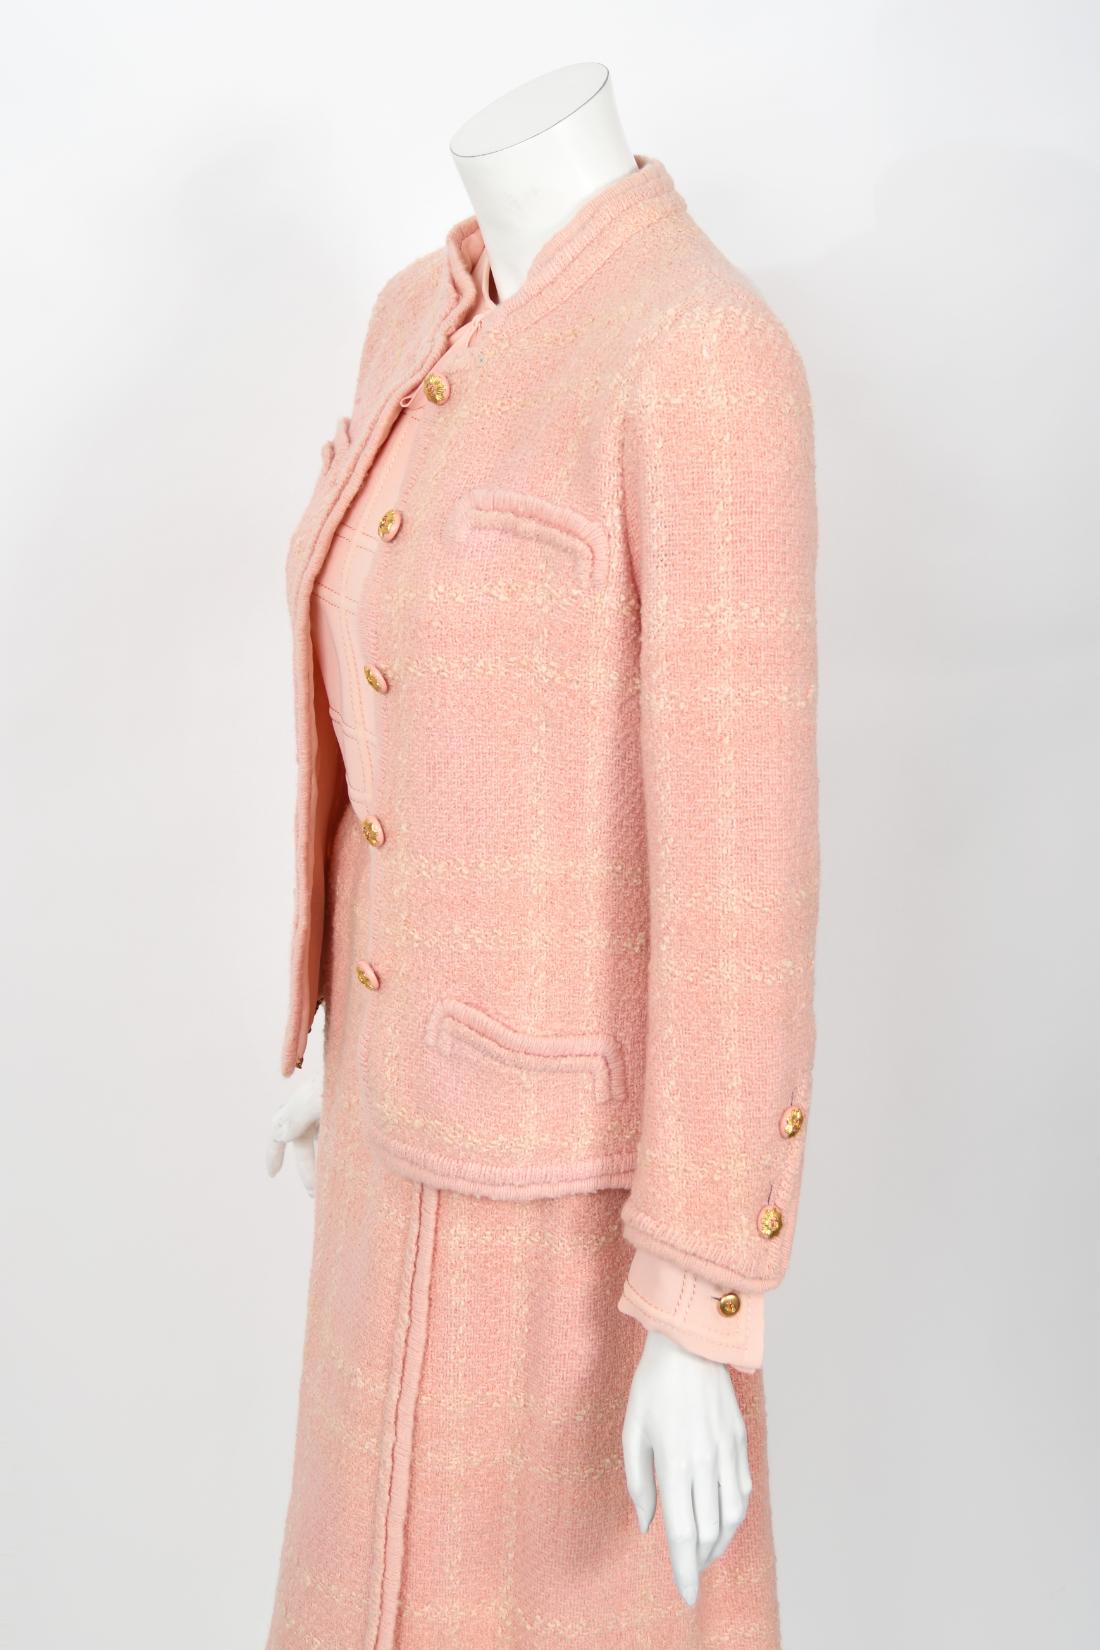 Vintage 1973 Chanel Haute Couture Documented Pink Wool Jacket Blouse Skirt Suit For Sale 3